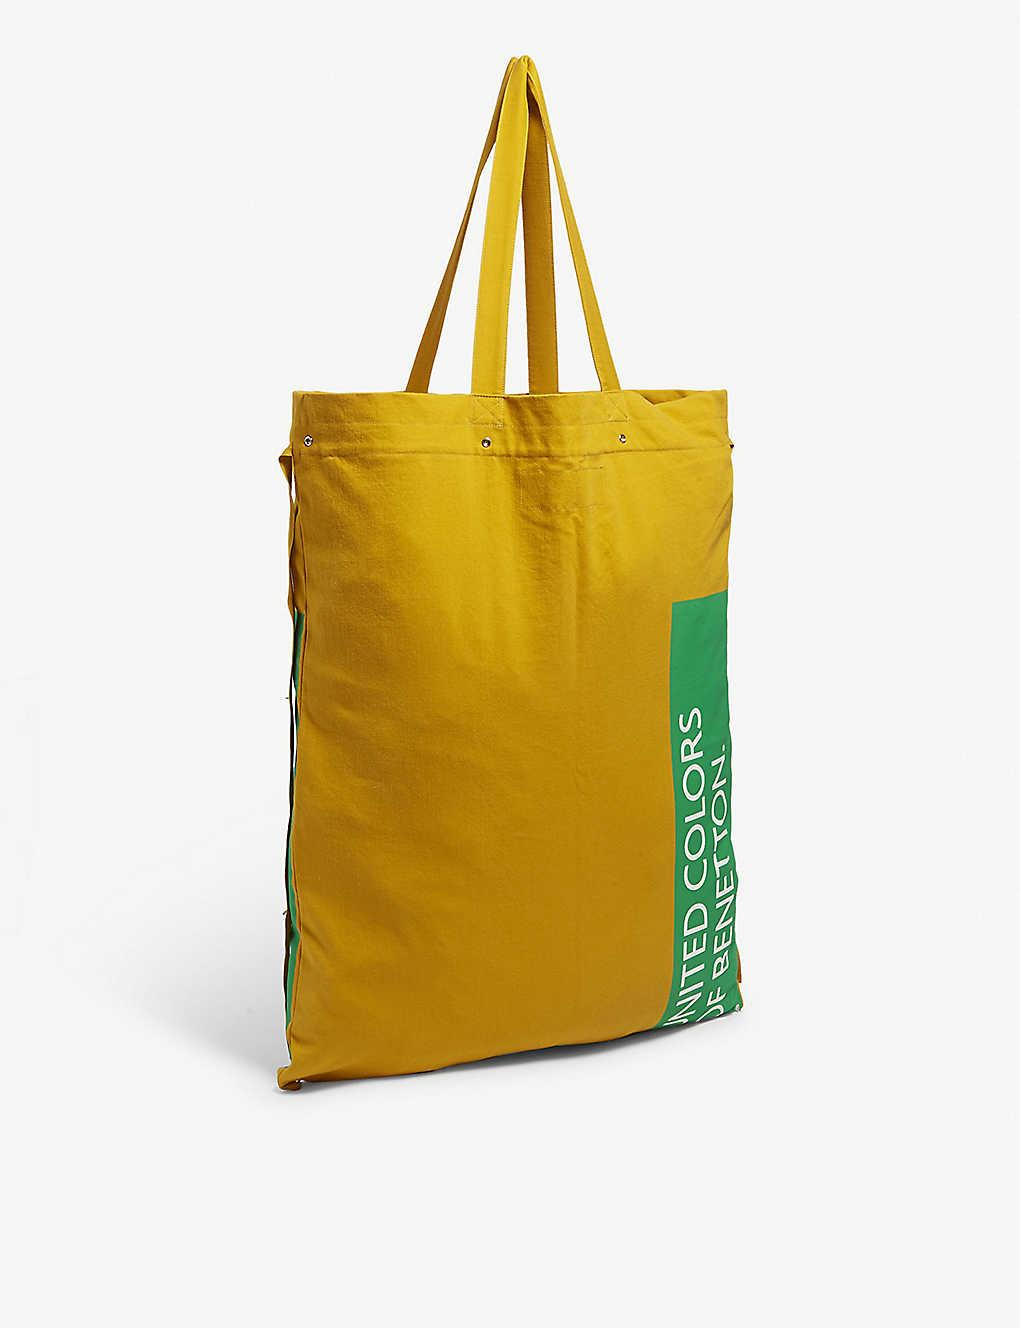 Benetton Large Canvas Tote Bag in Yellow - Lyst